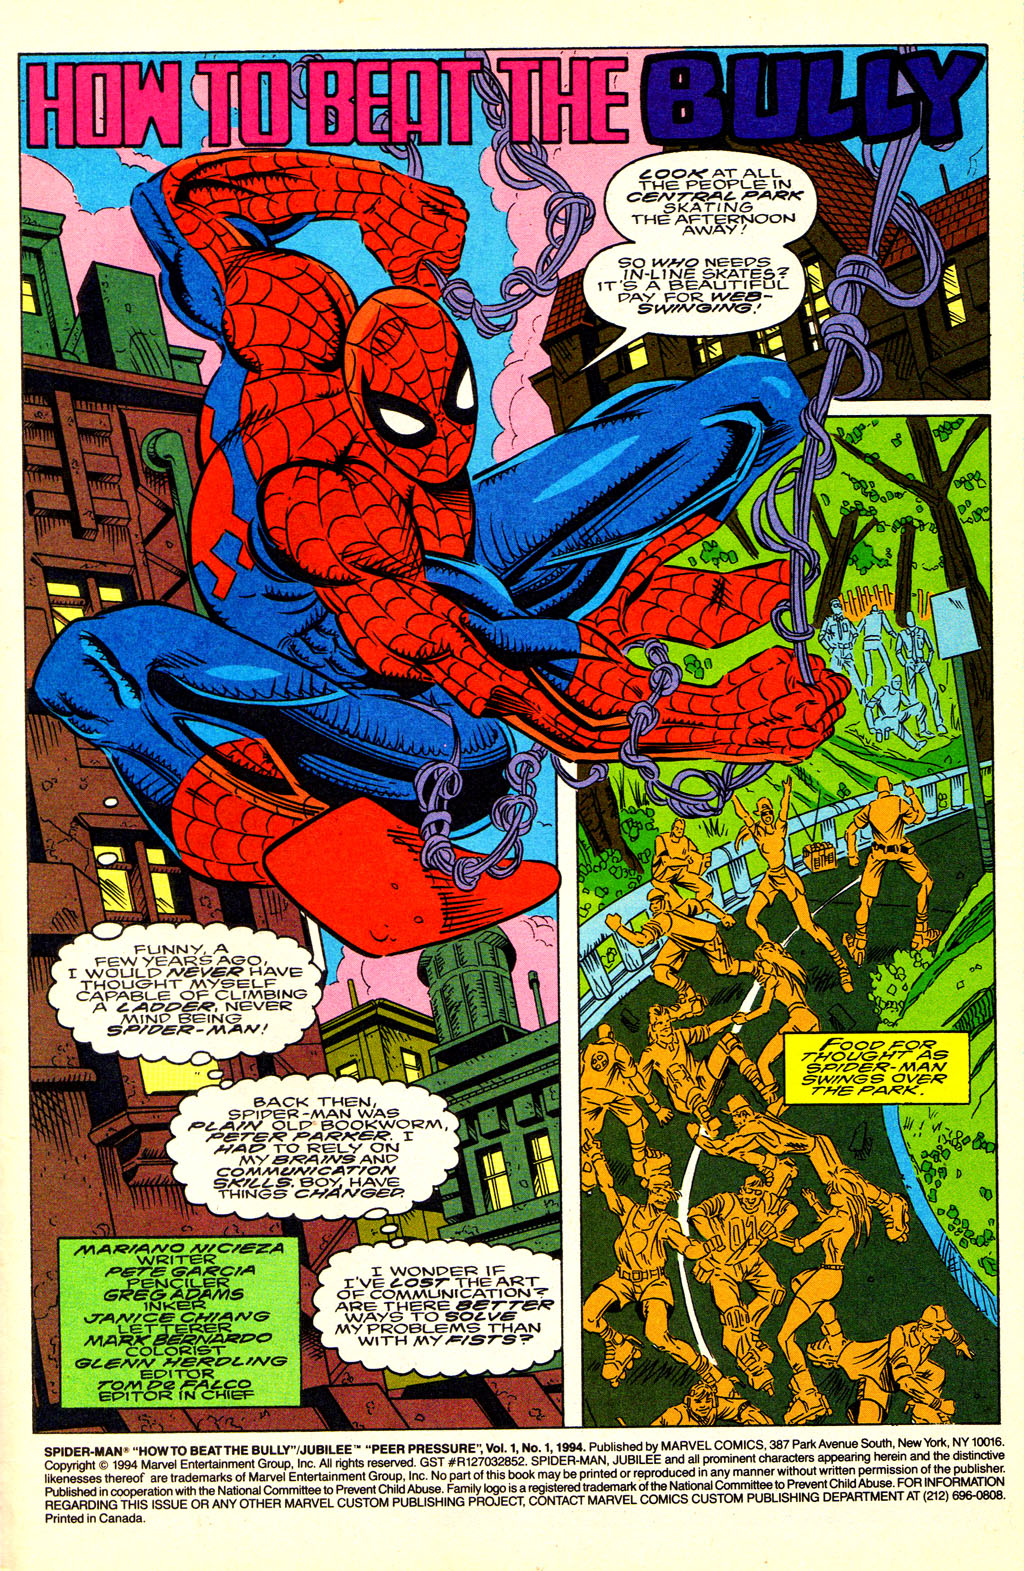 Read online Spider-Man "How to Beat the Bully" / Jubilee "Peer Pressure" comic -  Issue # Full - 13